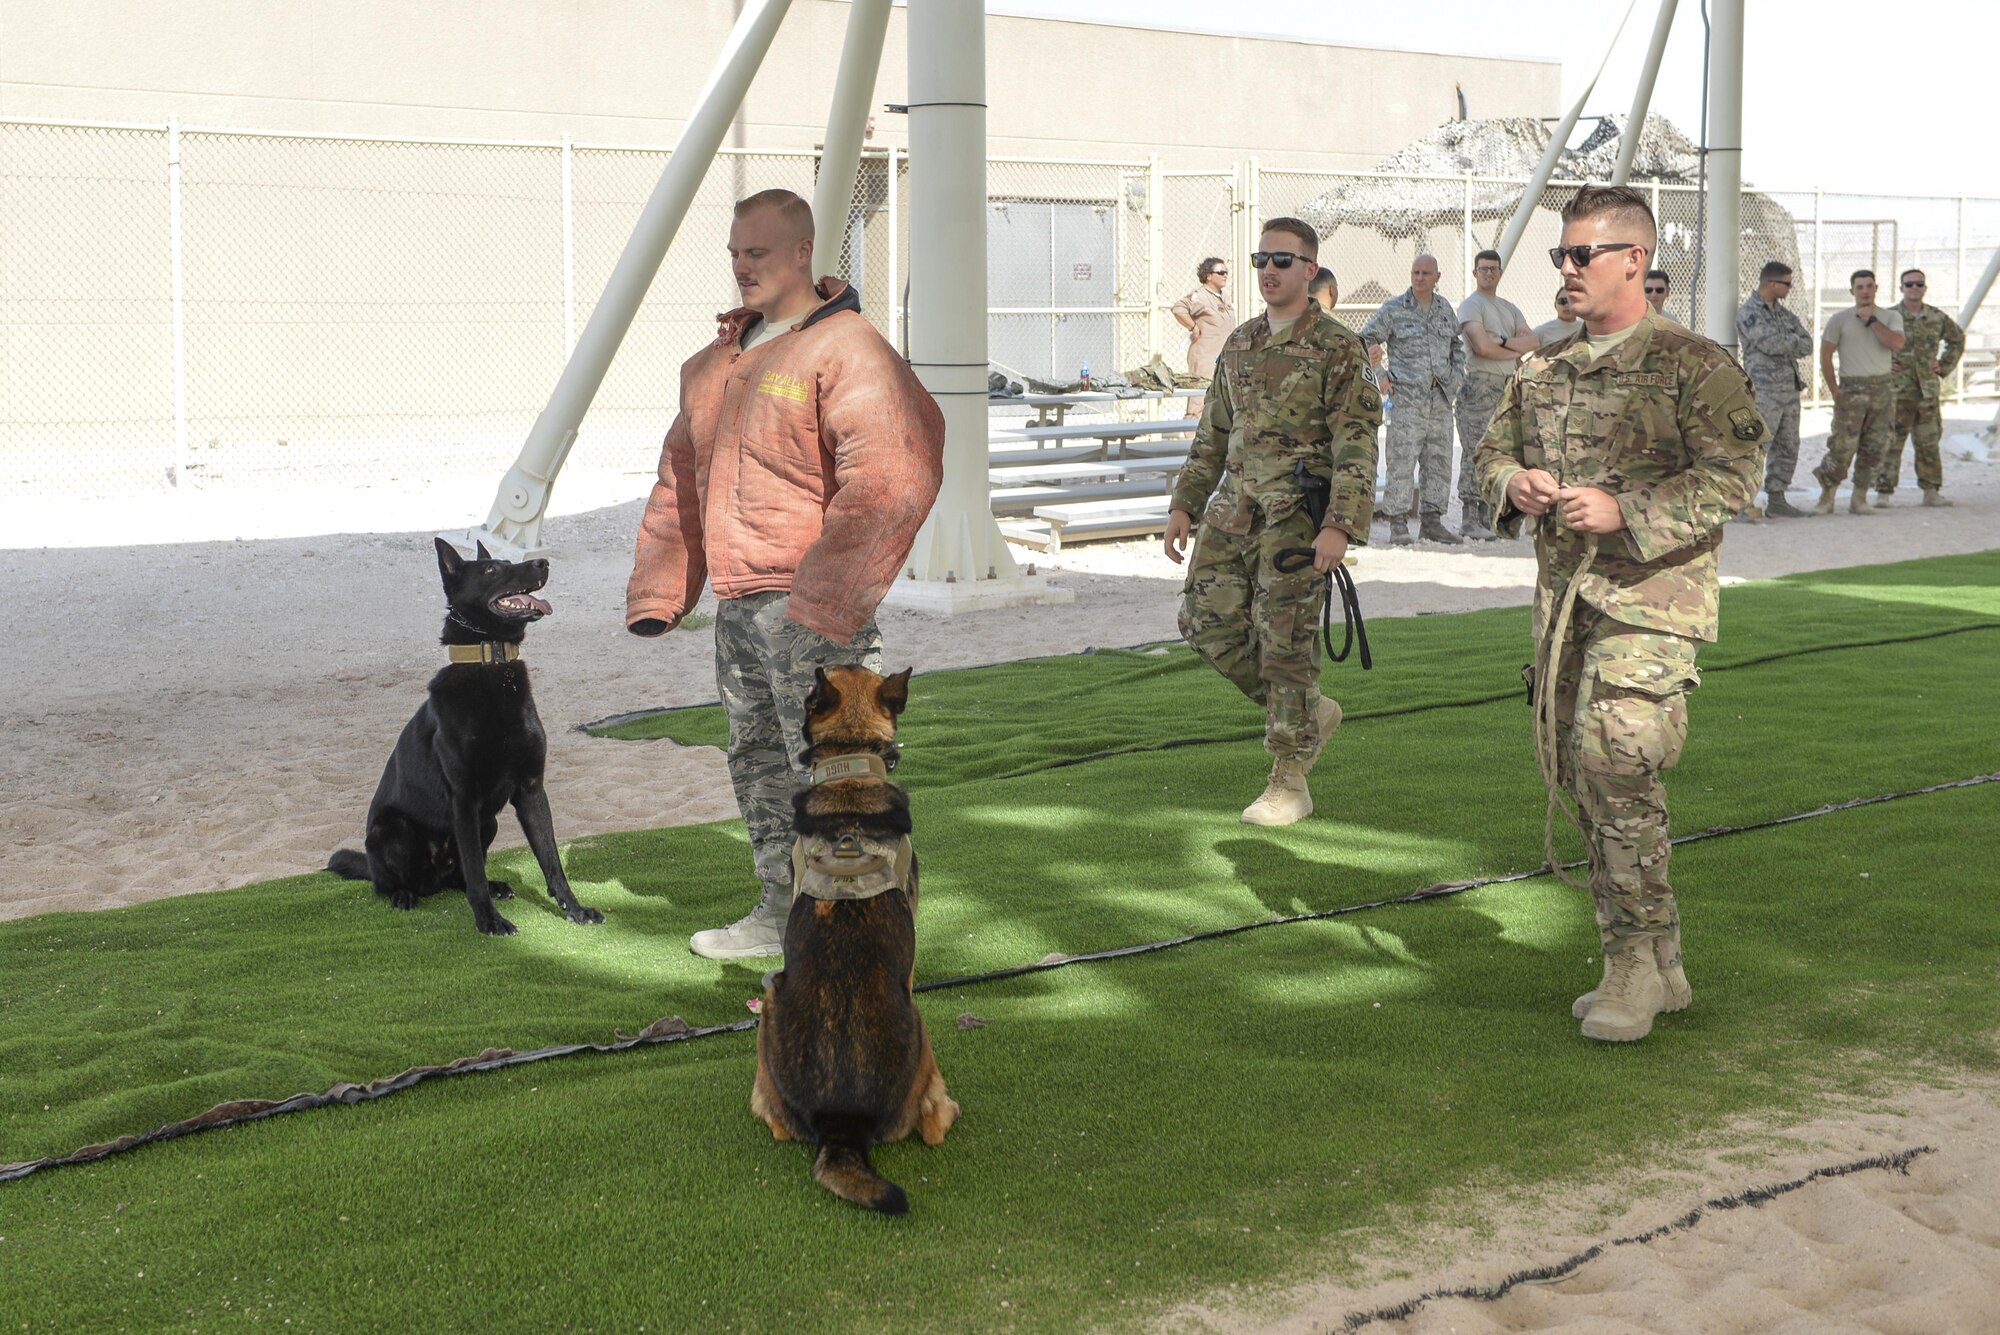 U.S. Air Force Staff Sgt. Brandon Stone, military working dog handler assigned to the 379th Expeditionary Security Forces Squadron, braces for impact as military working dog, Cola, attempts to detain him during a K-9 demonstration exercise at Al Udeid Air Base, Qatar, Aug. 17, 2017.